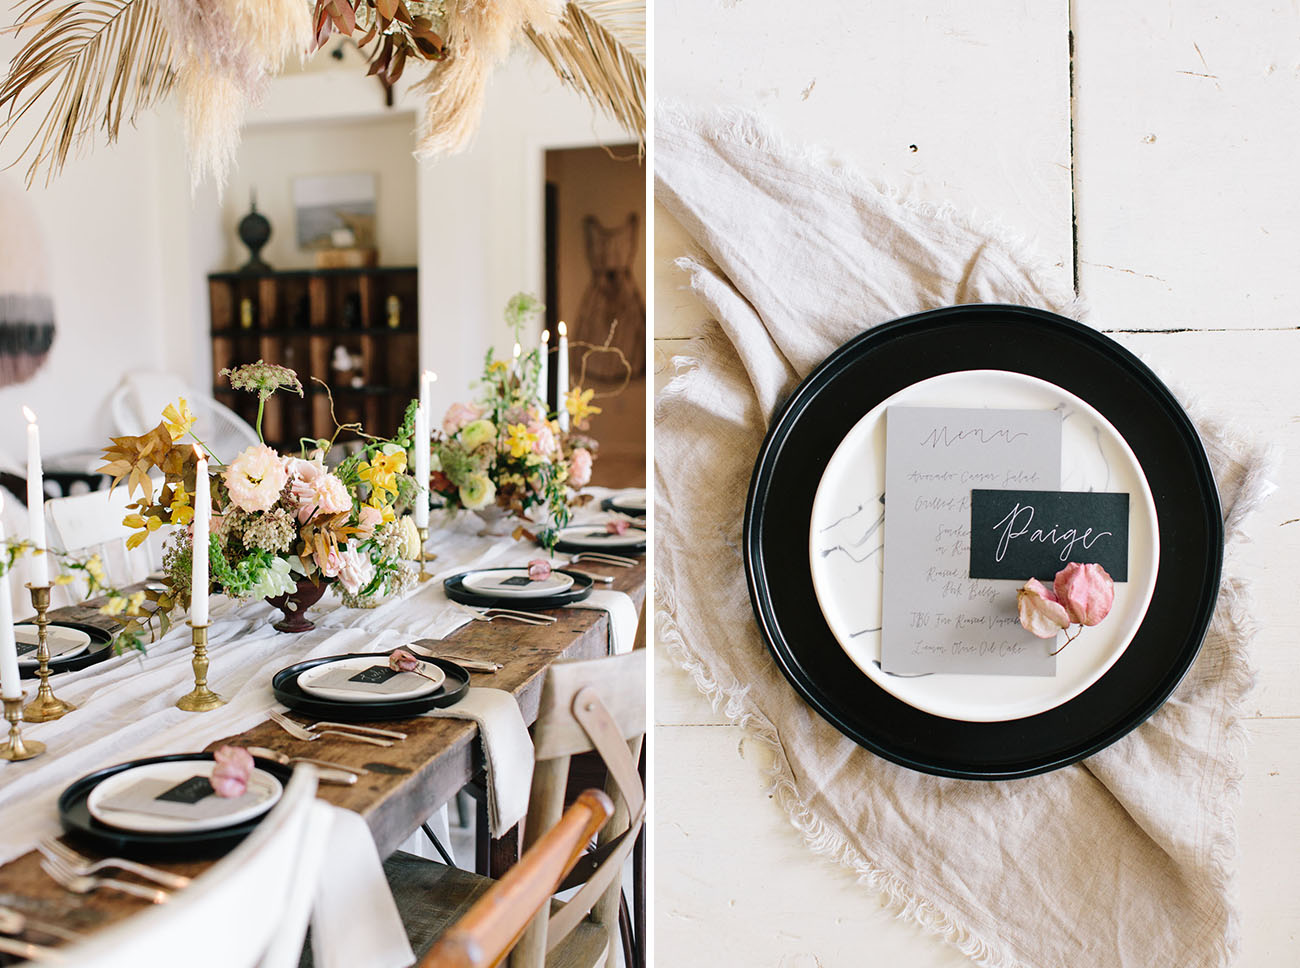 5 Tips to Throw the Ultimate Fall Dinner Party